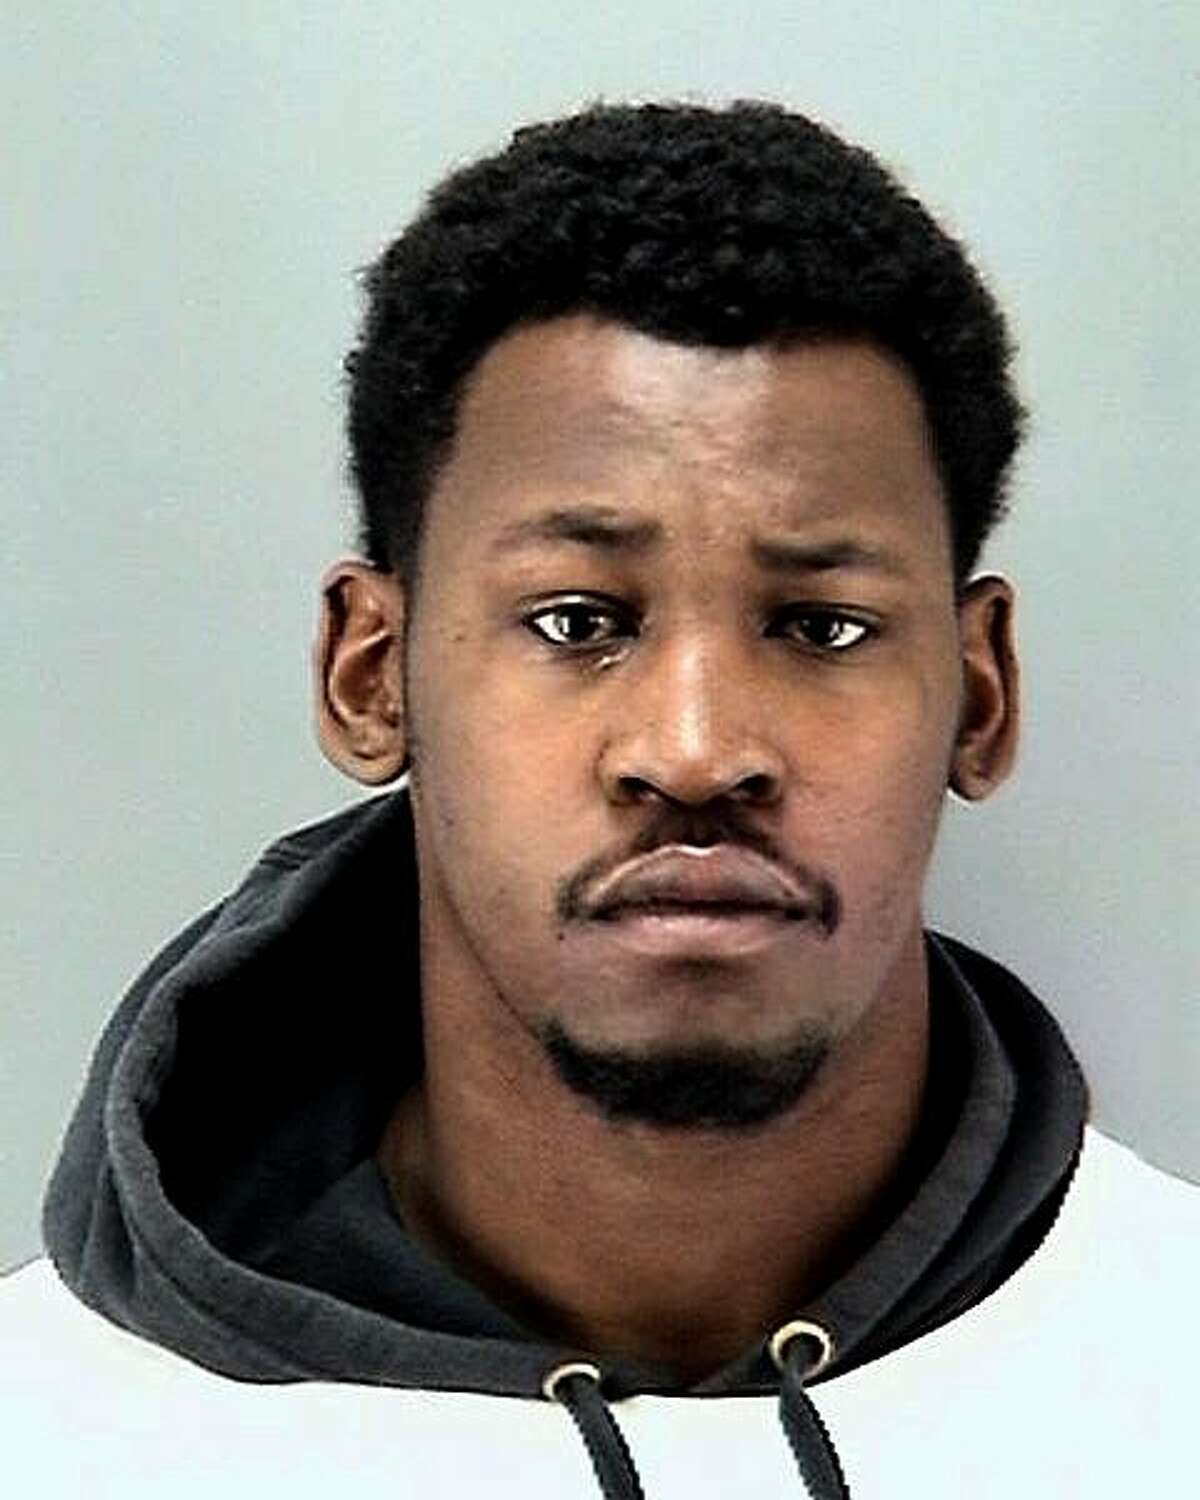 This booking photo provided Tuesday, March 6, 2018, by the San Francisco Police Department, shows Aldon Smith. The former Oakland Raiders NFL football player turned himself into police on Tuesday and was booked into San Francisco County Jail on suspicion of misdemeanor domestic violence and three related misdemeanors. (San Francisco Police Department via AP)